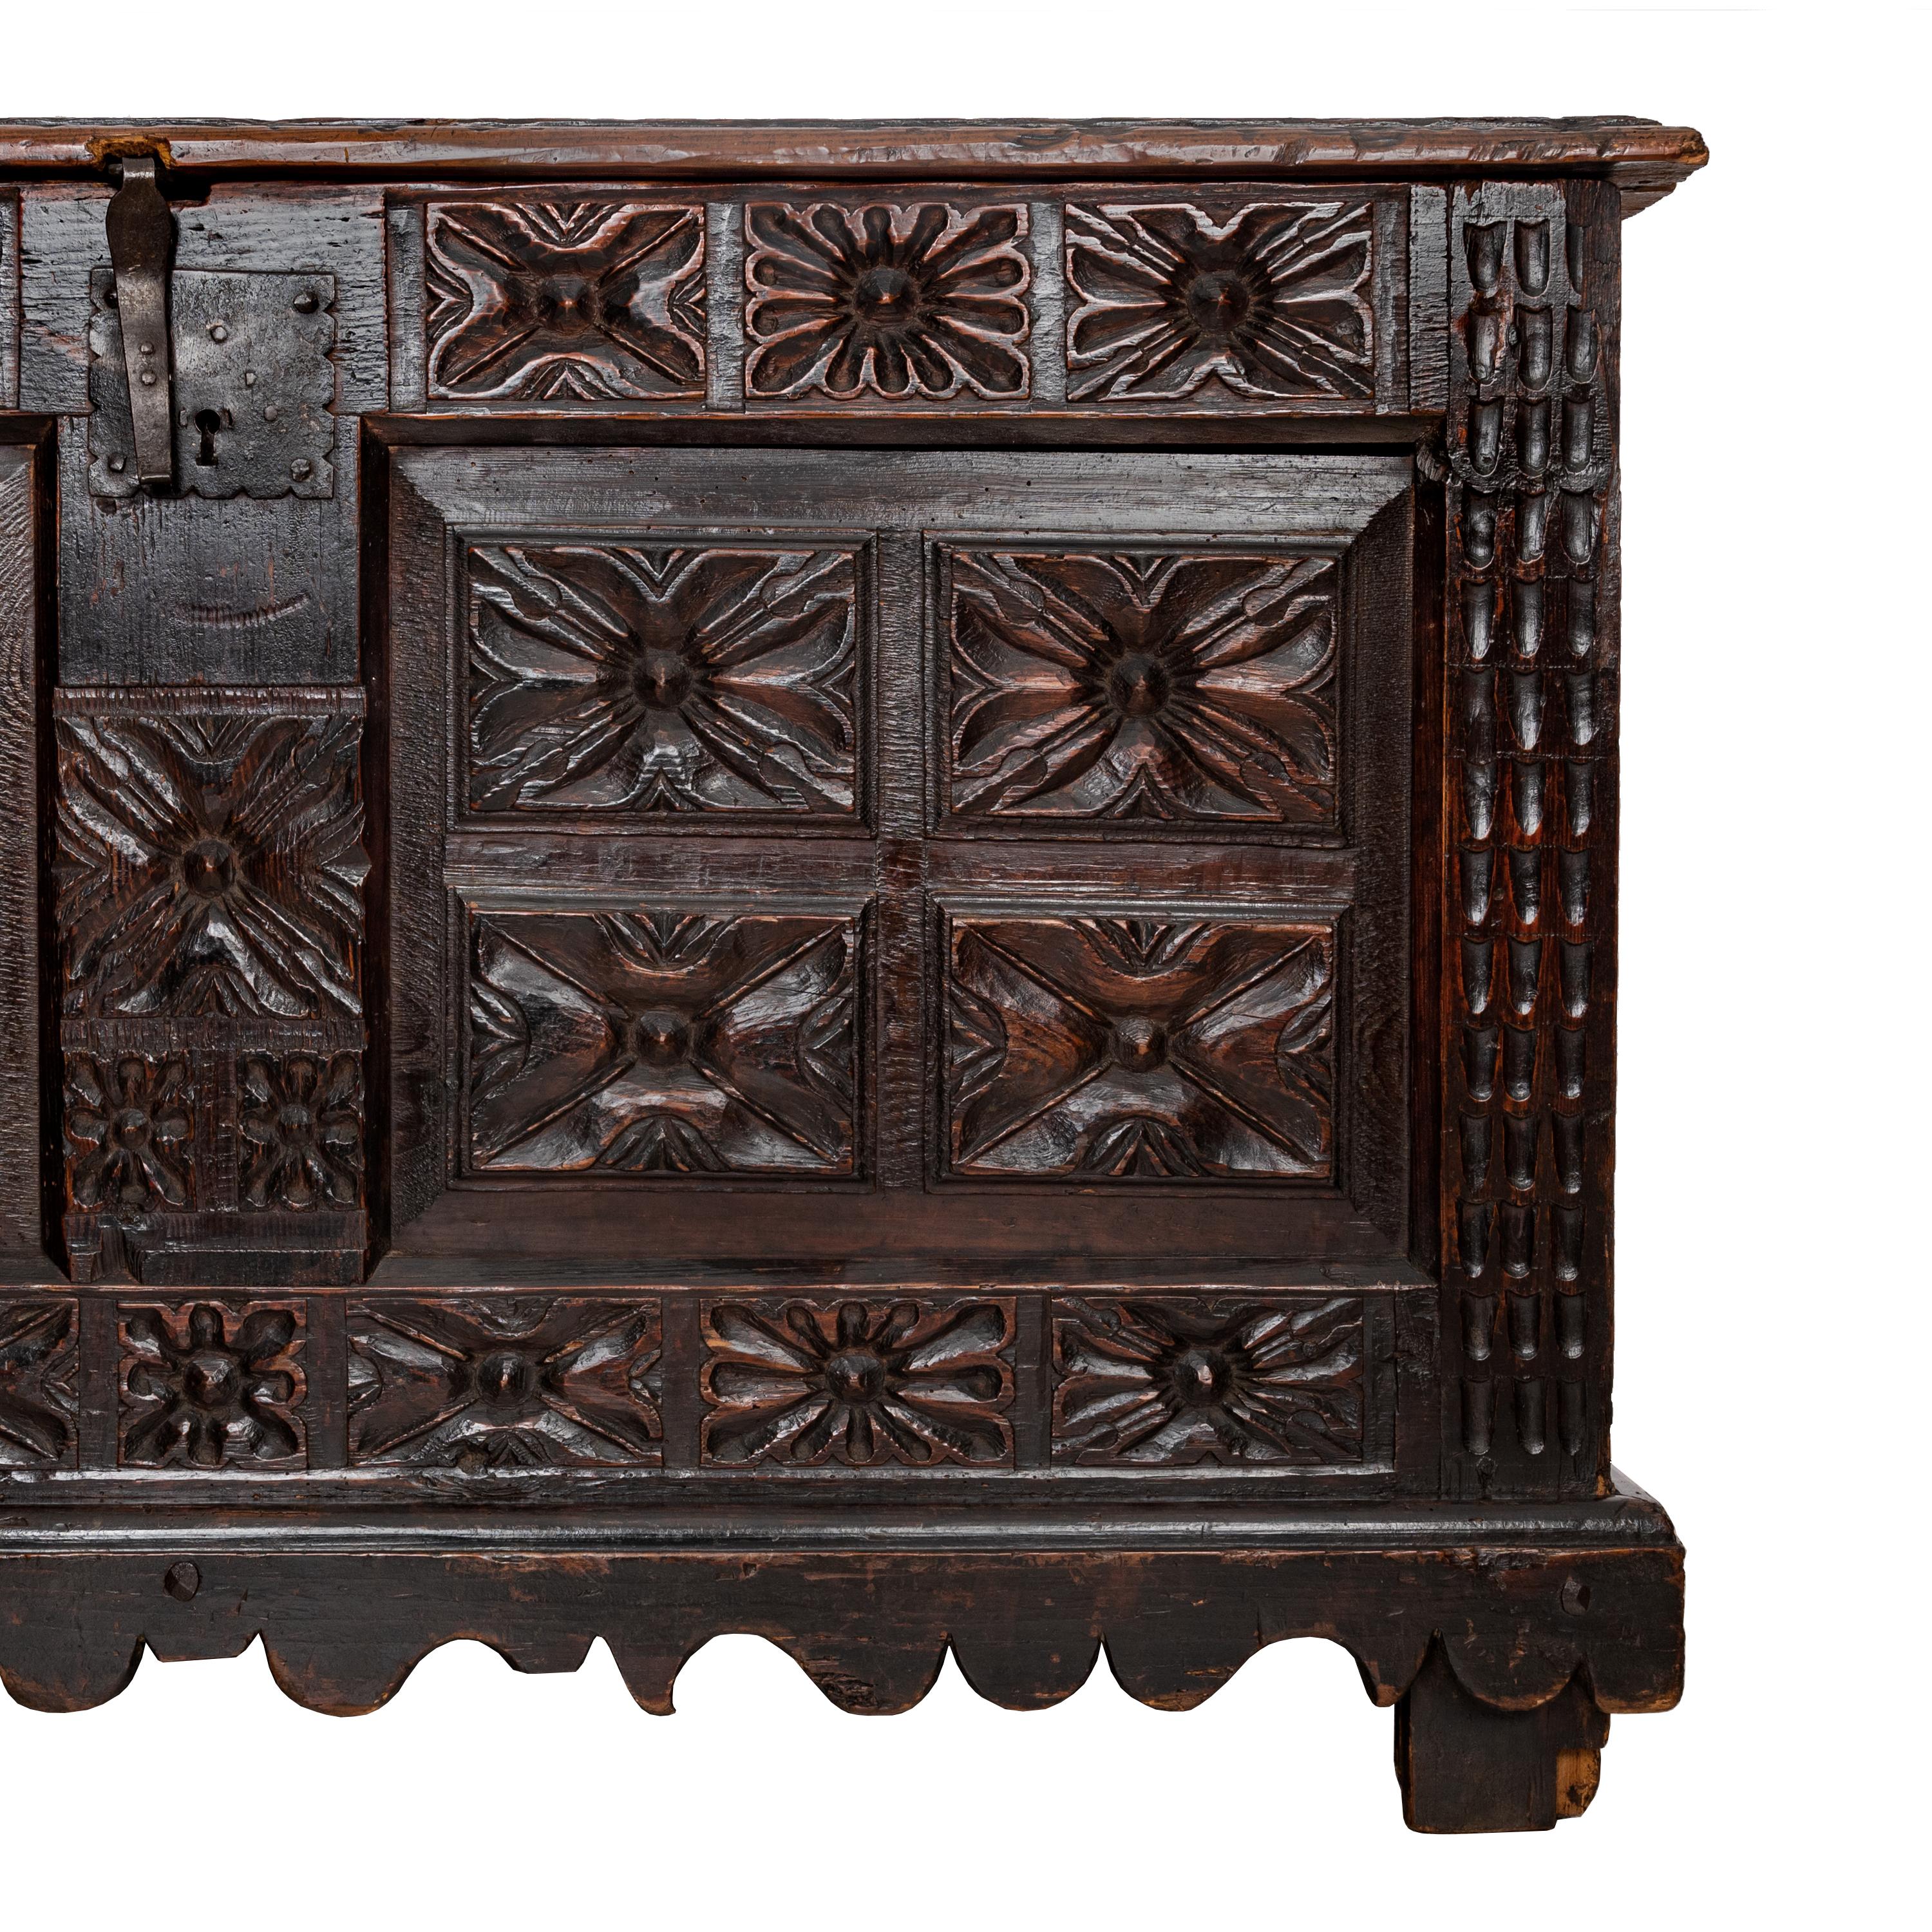 Antique 18th Century Spanish Colonial Carved Cedar Coffer Chest Mexico 1750 In Good Condition For Sale In Portland, OR